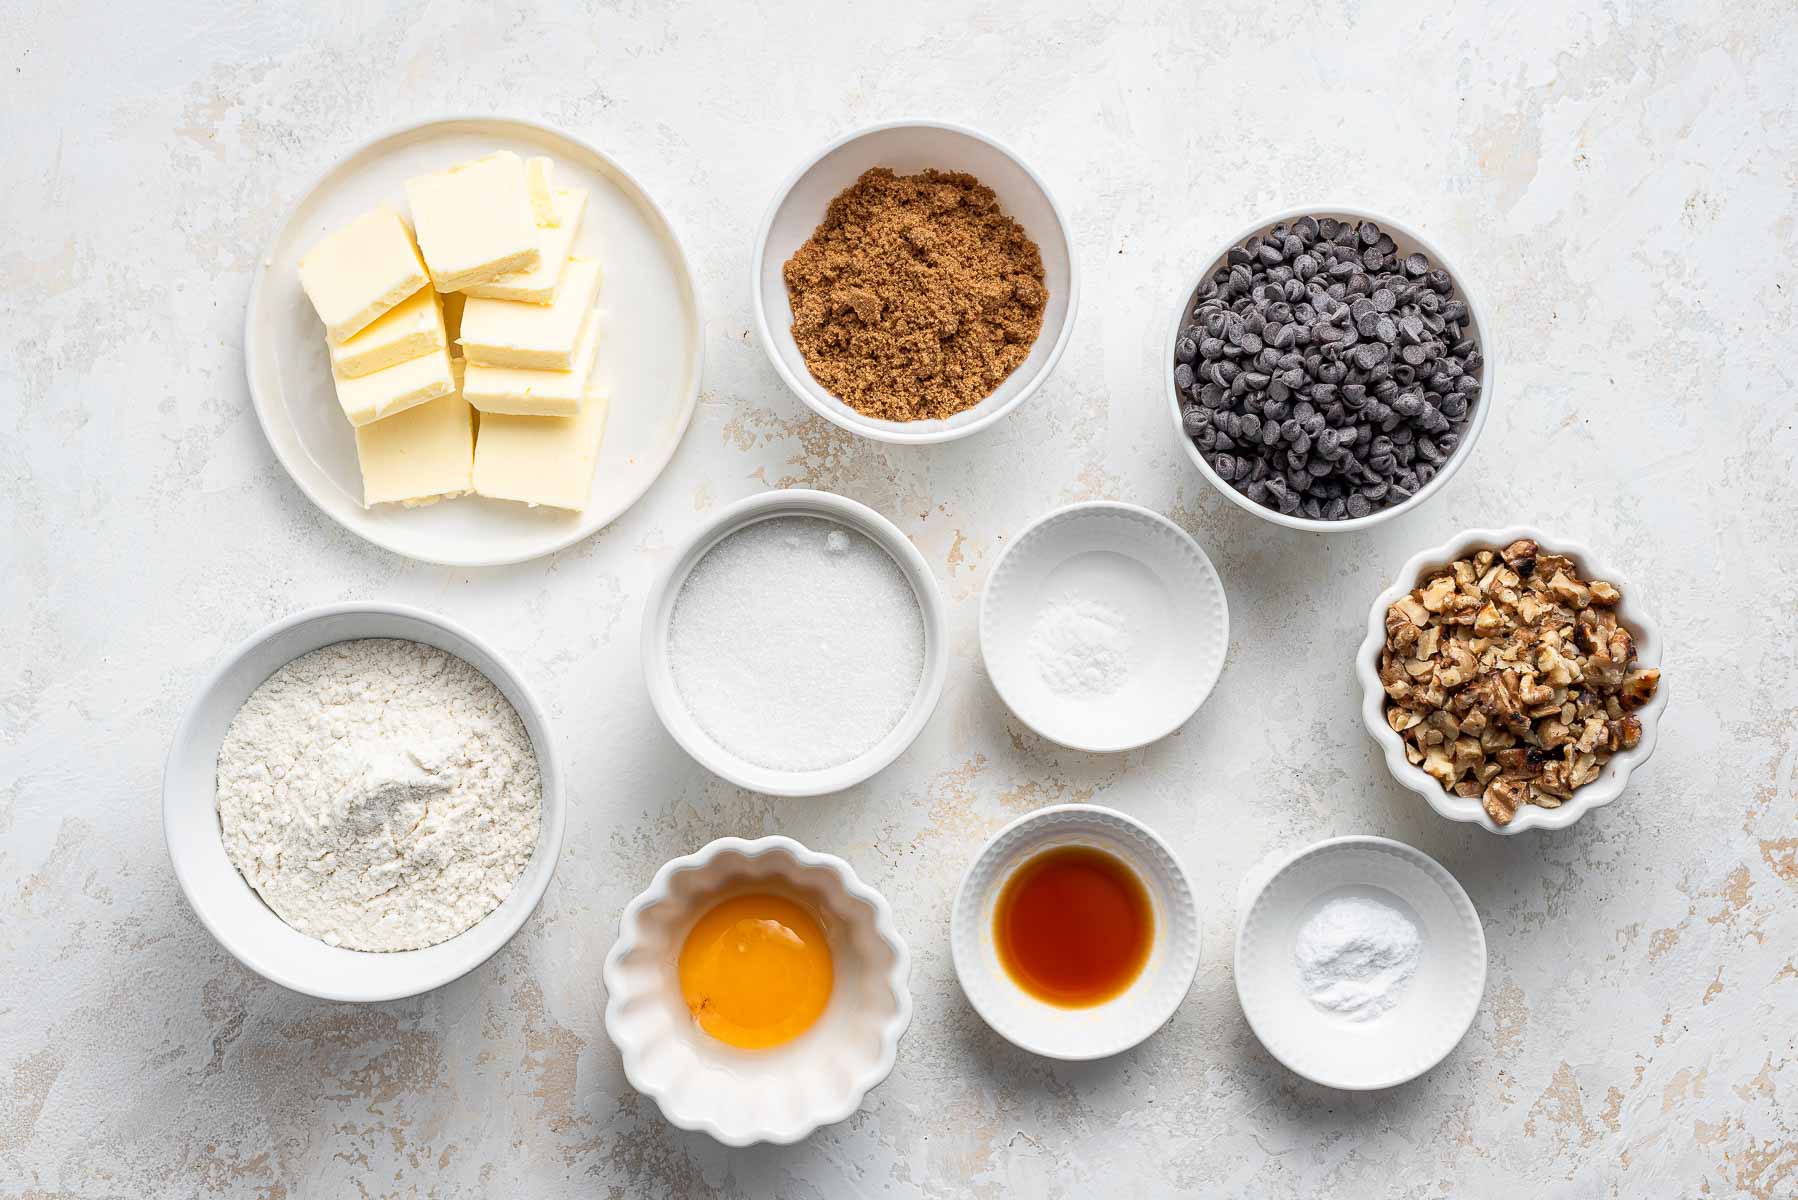 Ingredients for cookies on white table.